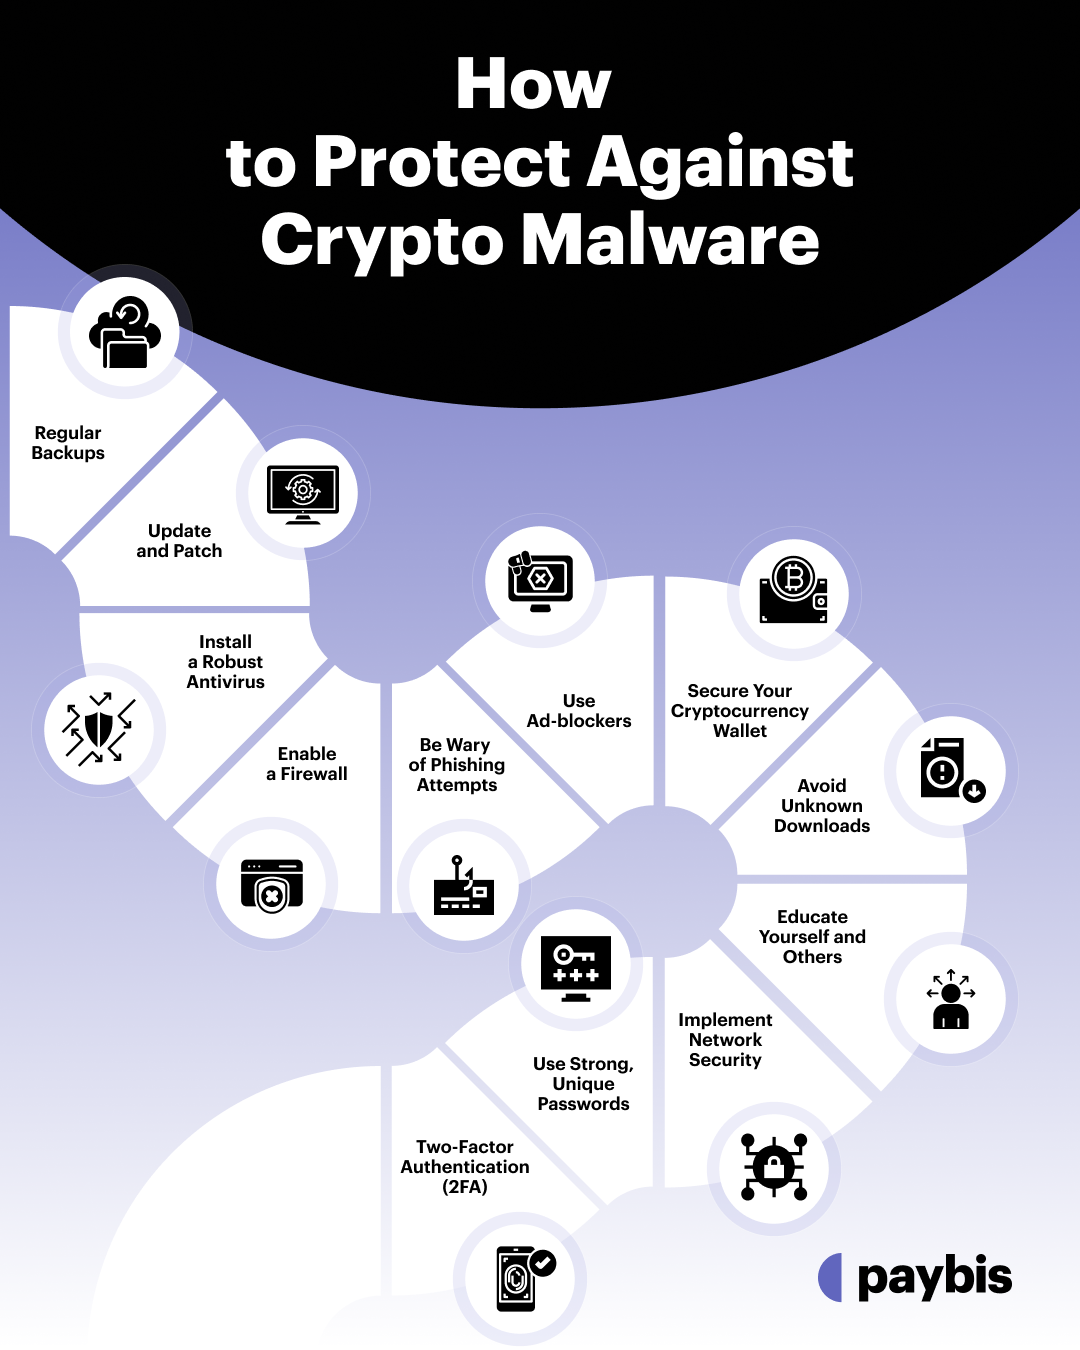 How to Protect Against Crypto Malware